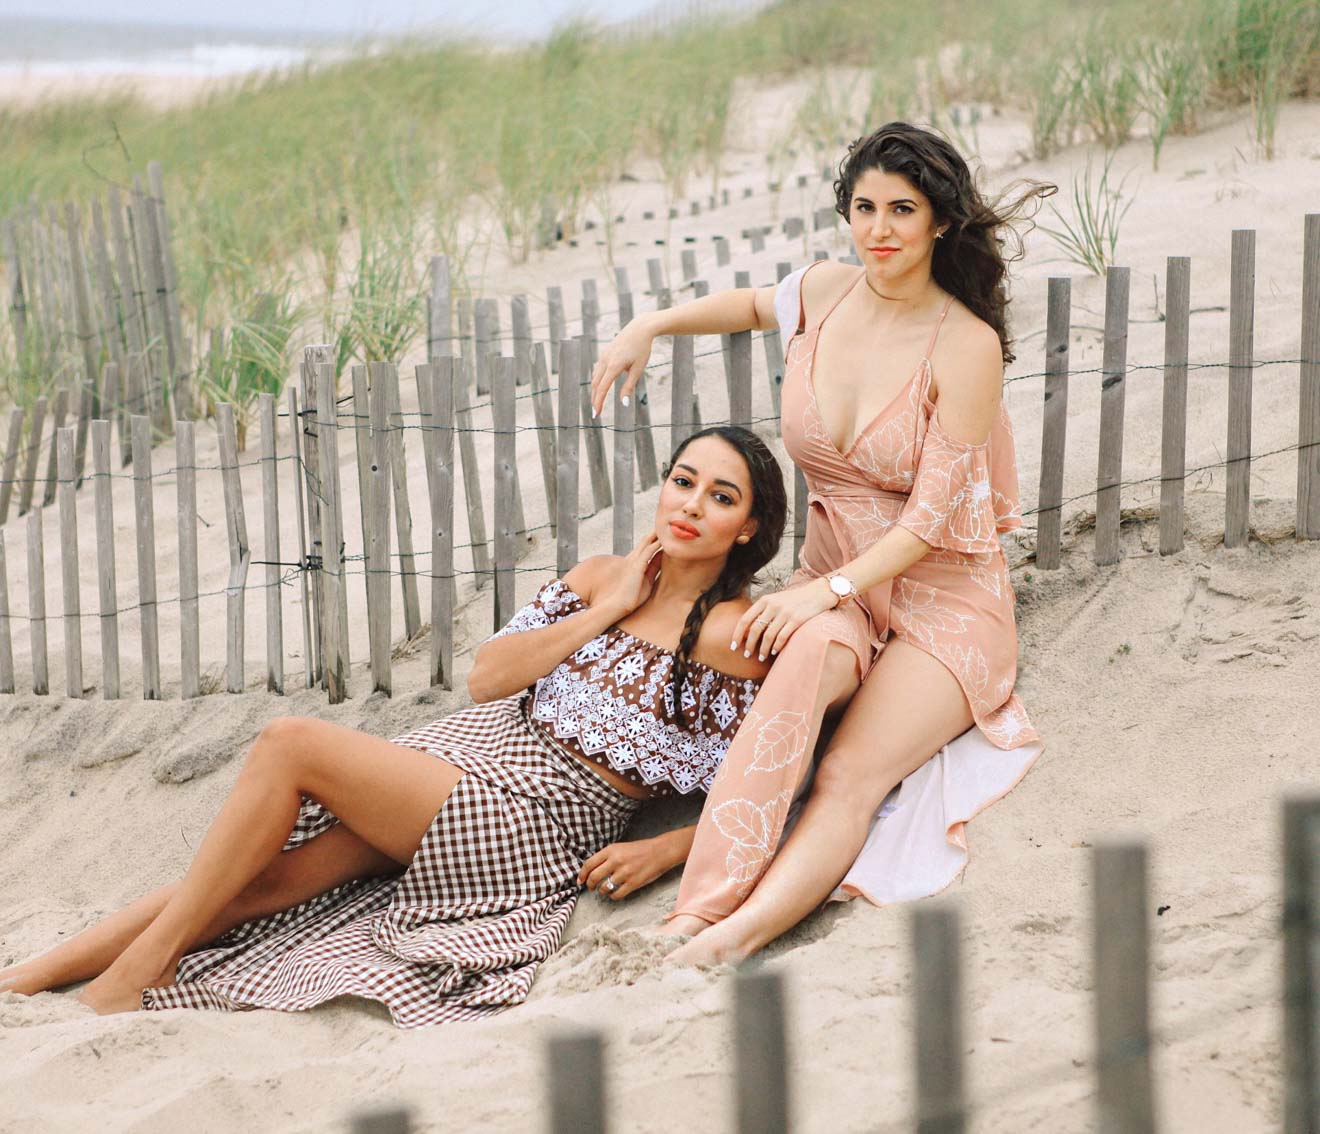 Hamptons Travel Guide, Laura Lily Fashion Travel and Lifestyle Blog, Best Places to See in The Hamptons, Shop Tobi Dress, Elizabeth Keene